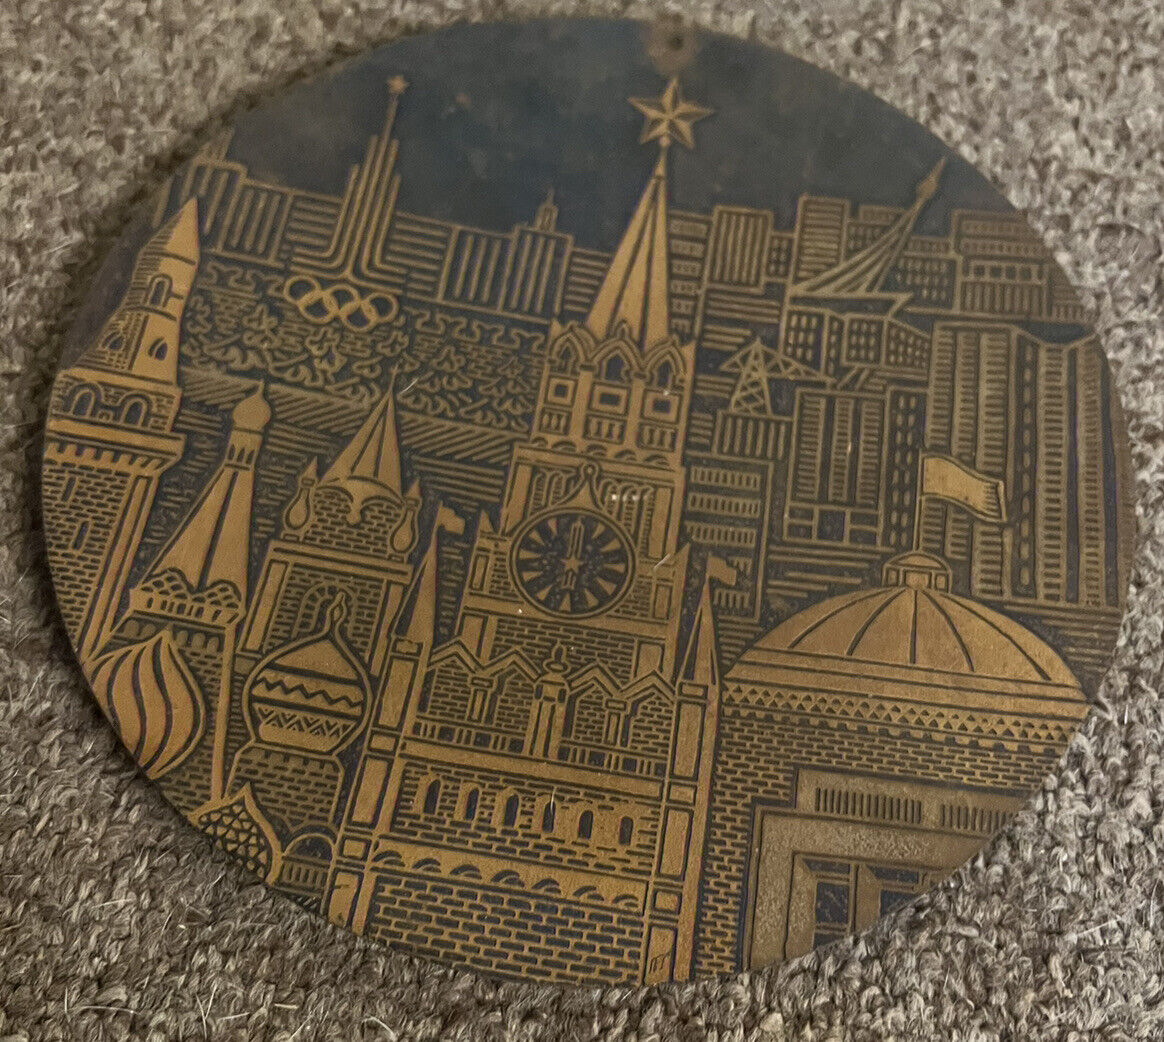 1980 Russian Moscow olympics metal plate